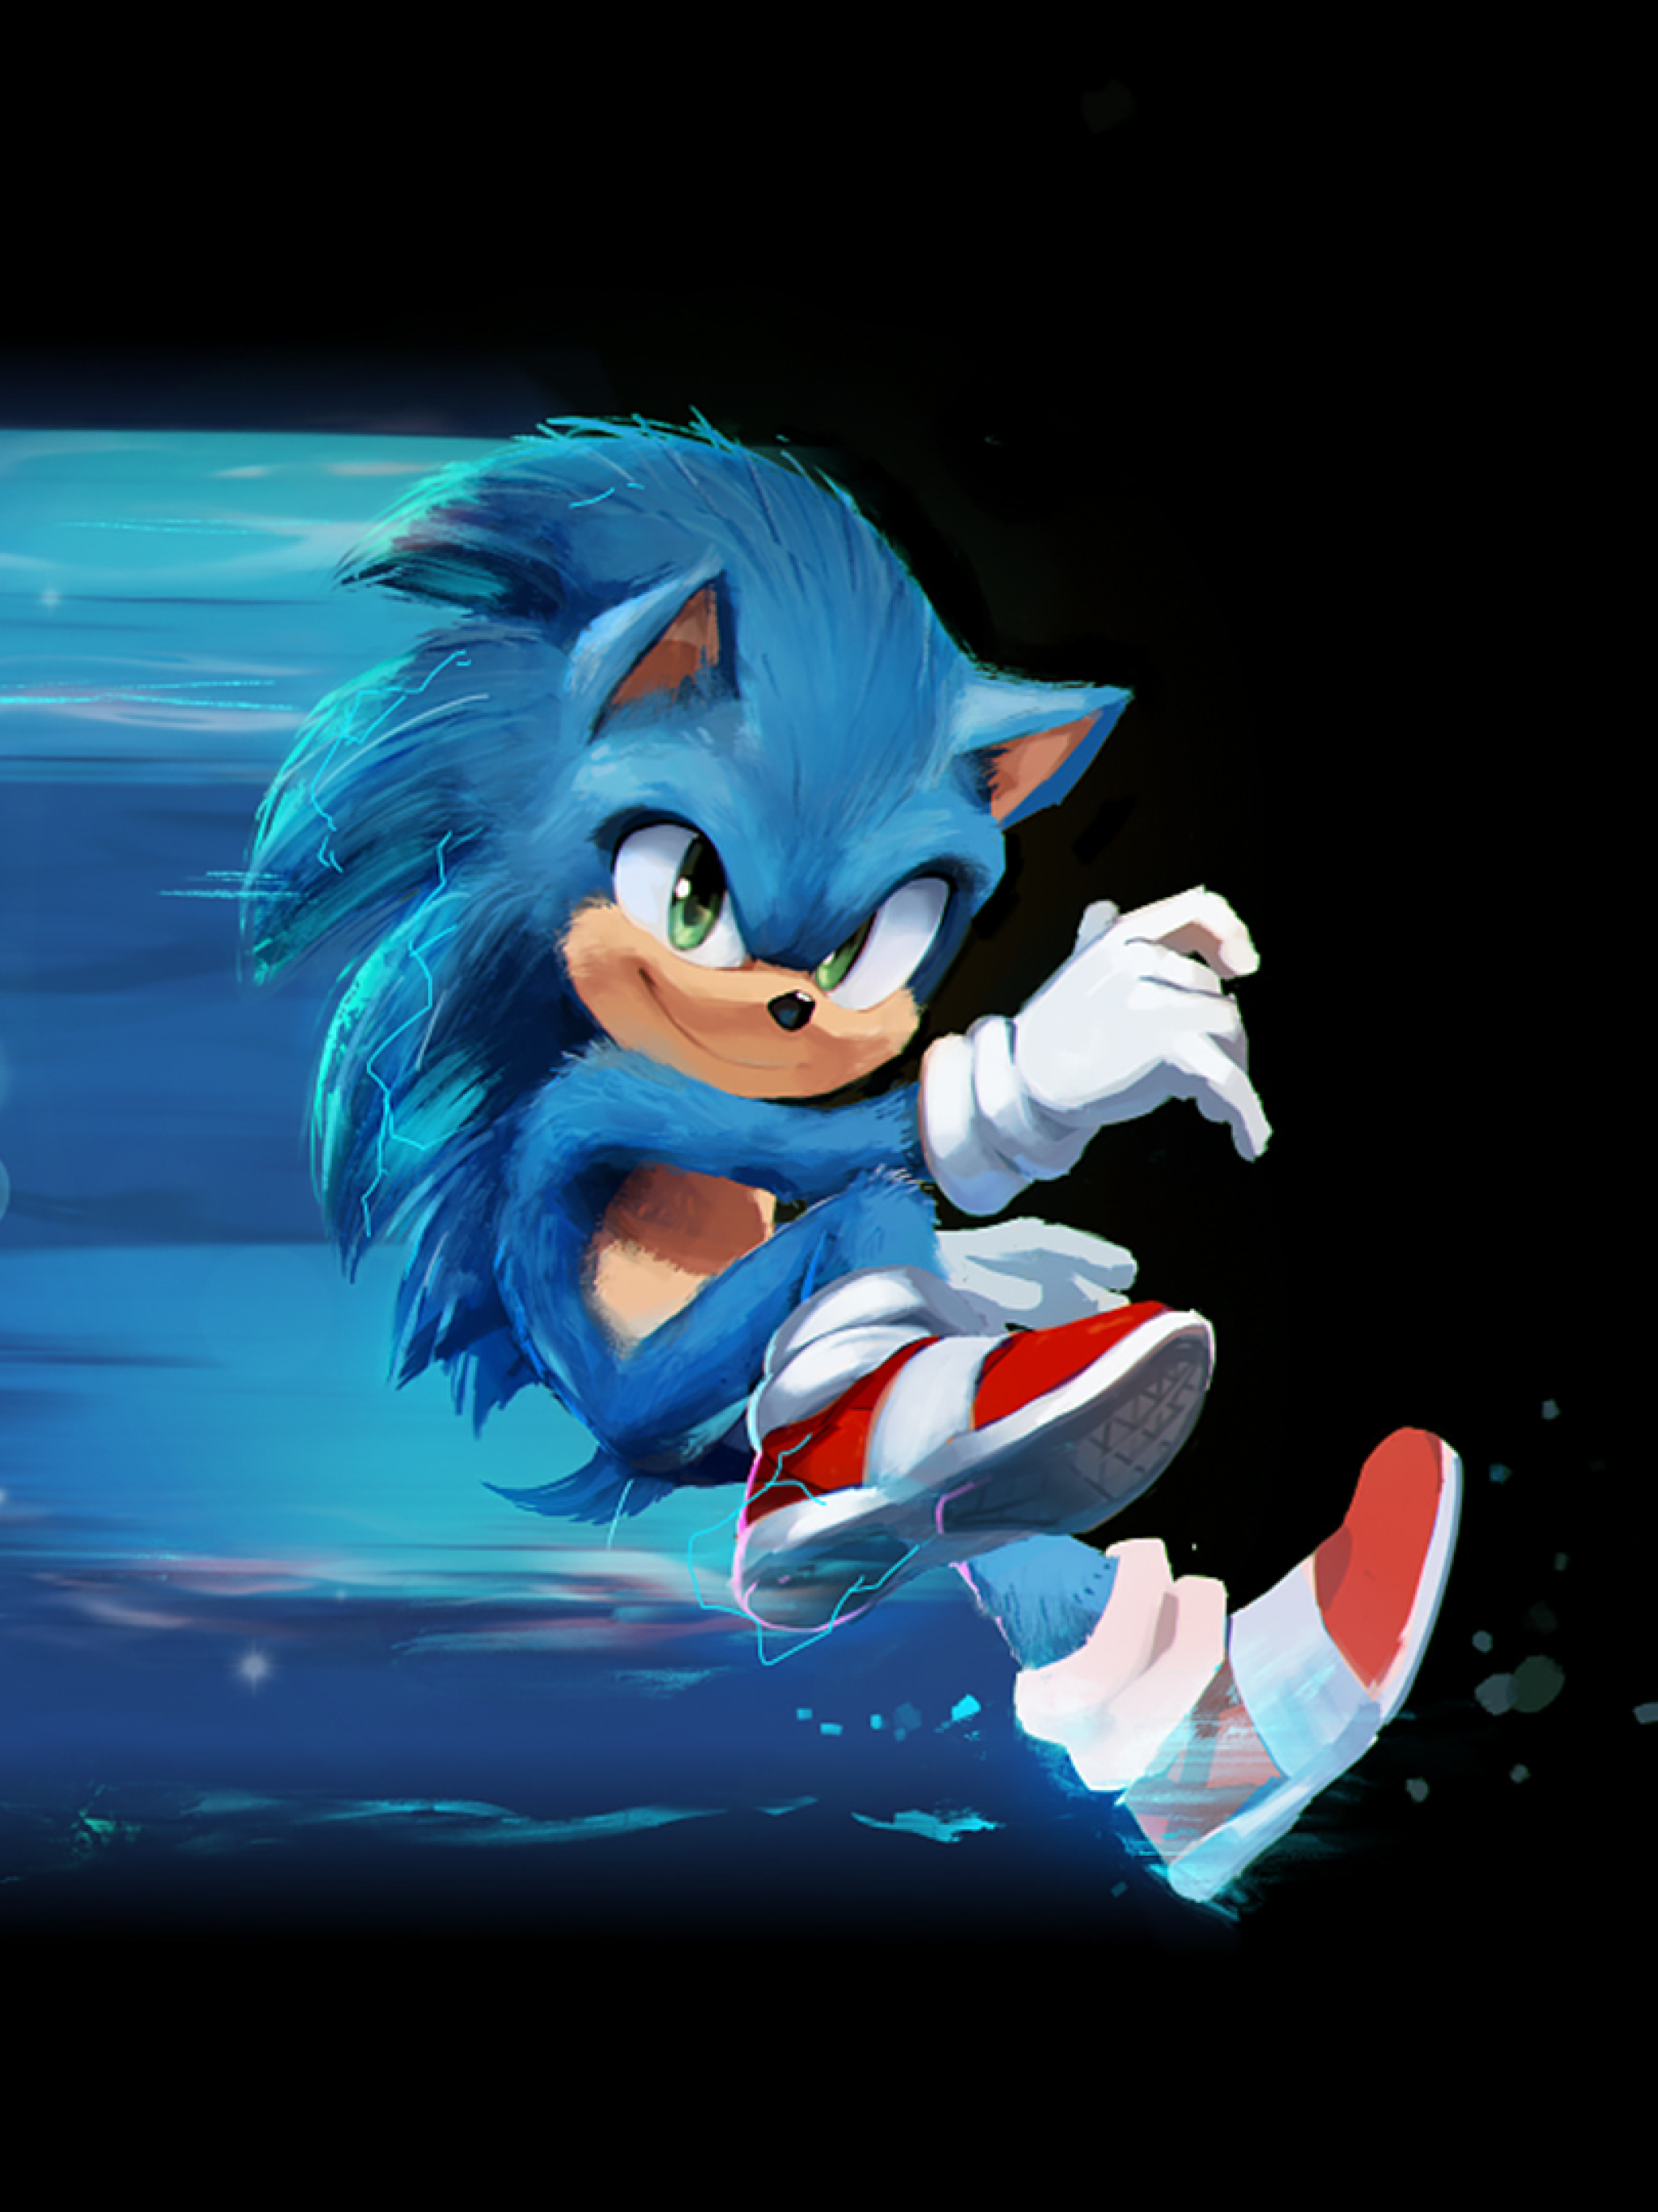 48x2732 Sonic The Hedgehog Artwork 48x2732 Resolution Wallpaper Hd Movies 4k Wallpapers Images Photos And Background